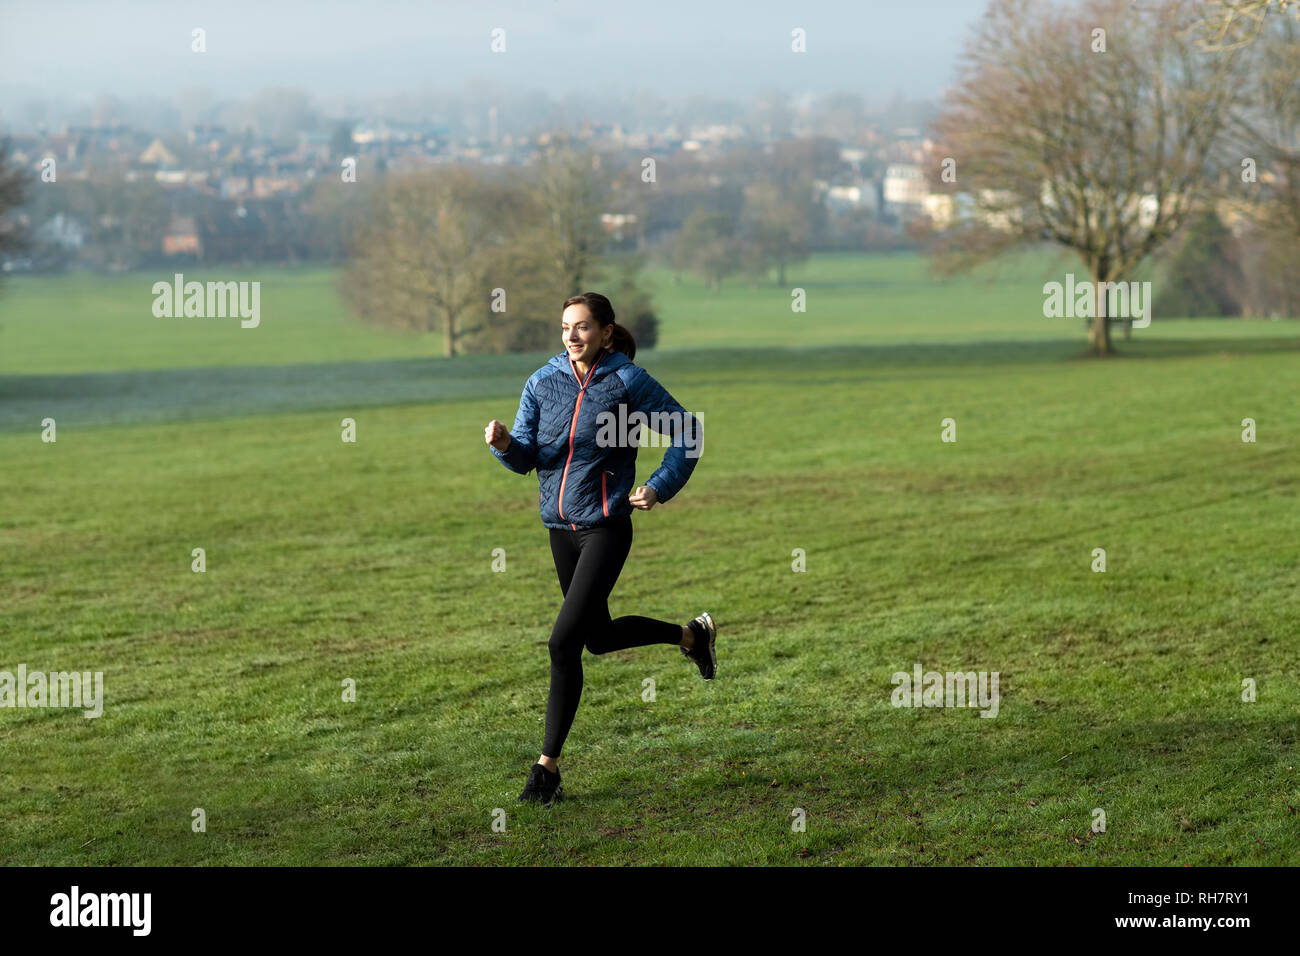 Woman On Early Morning Winter Run Through Park Keeping Fit Through Exercise Stock Photo